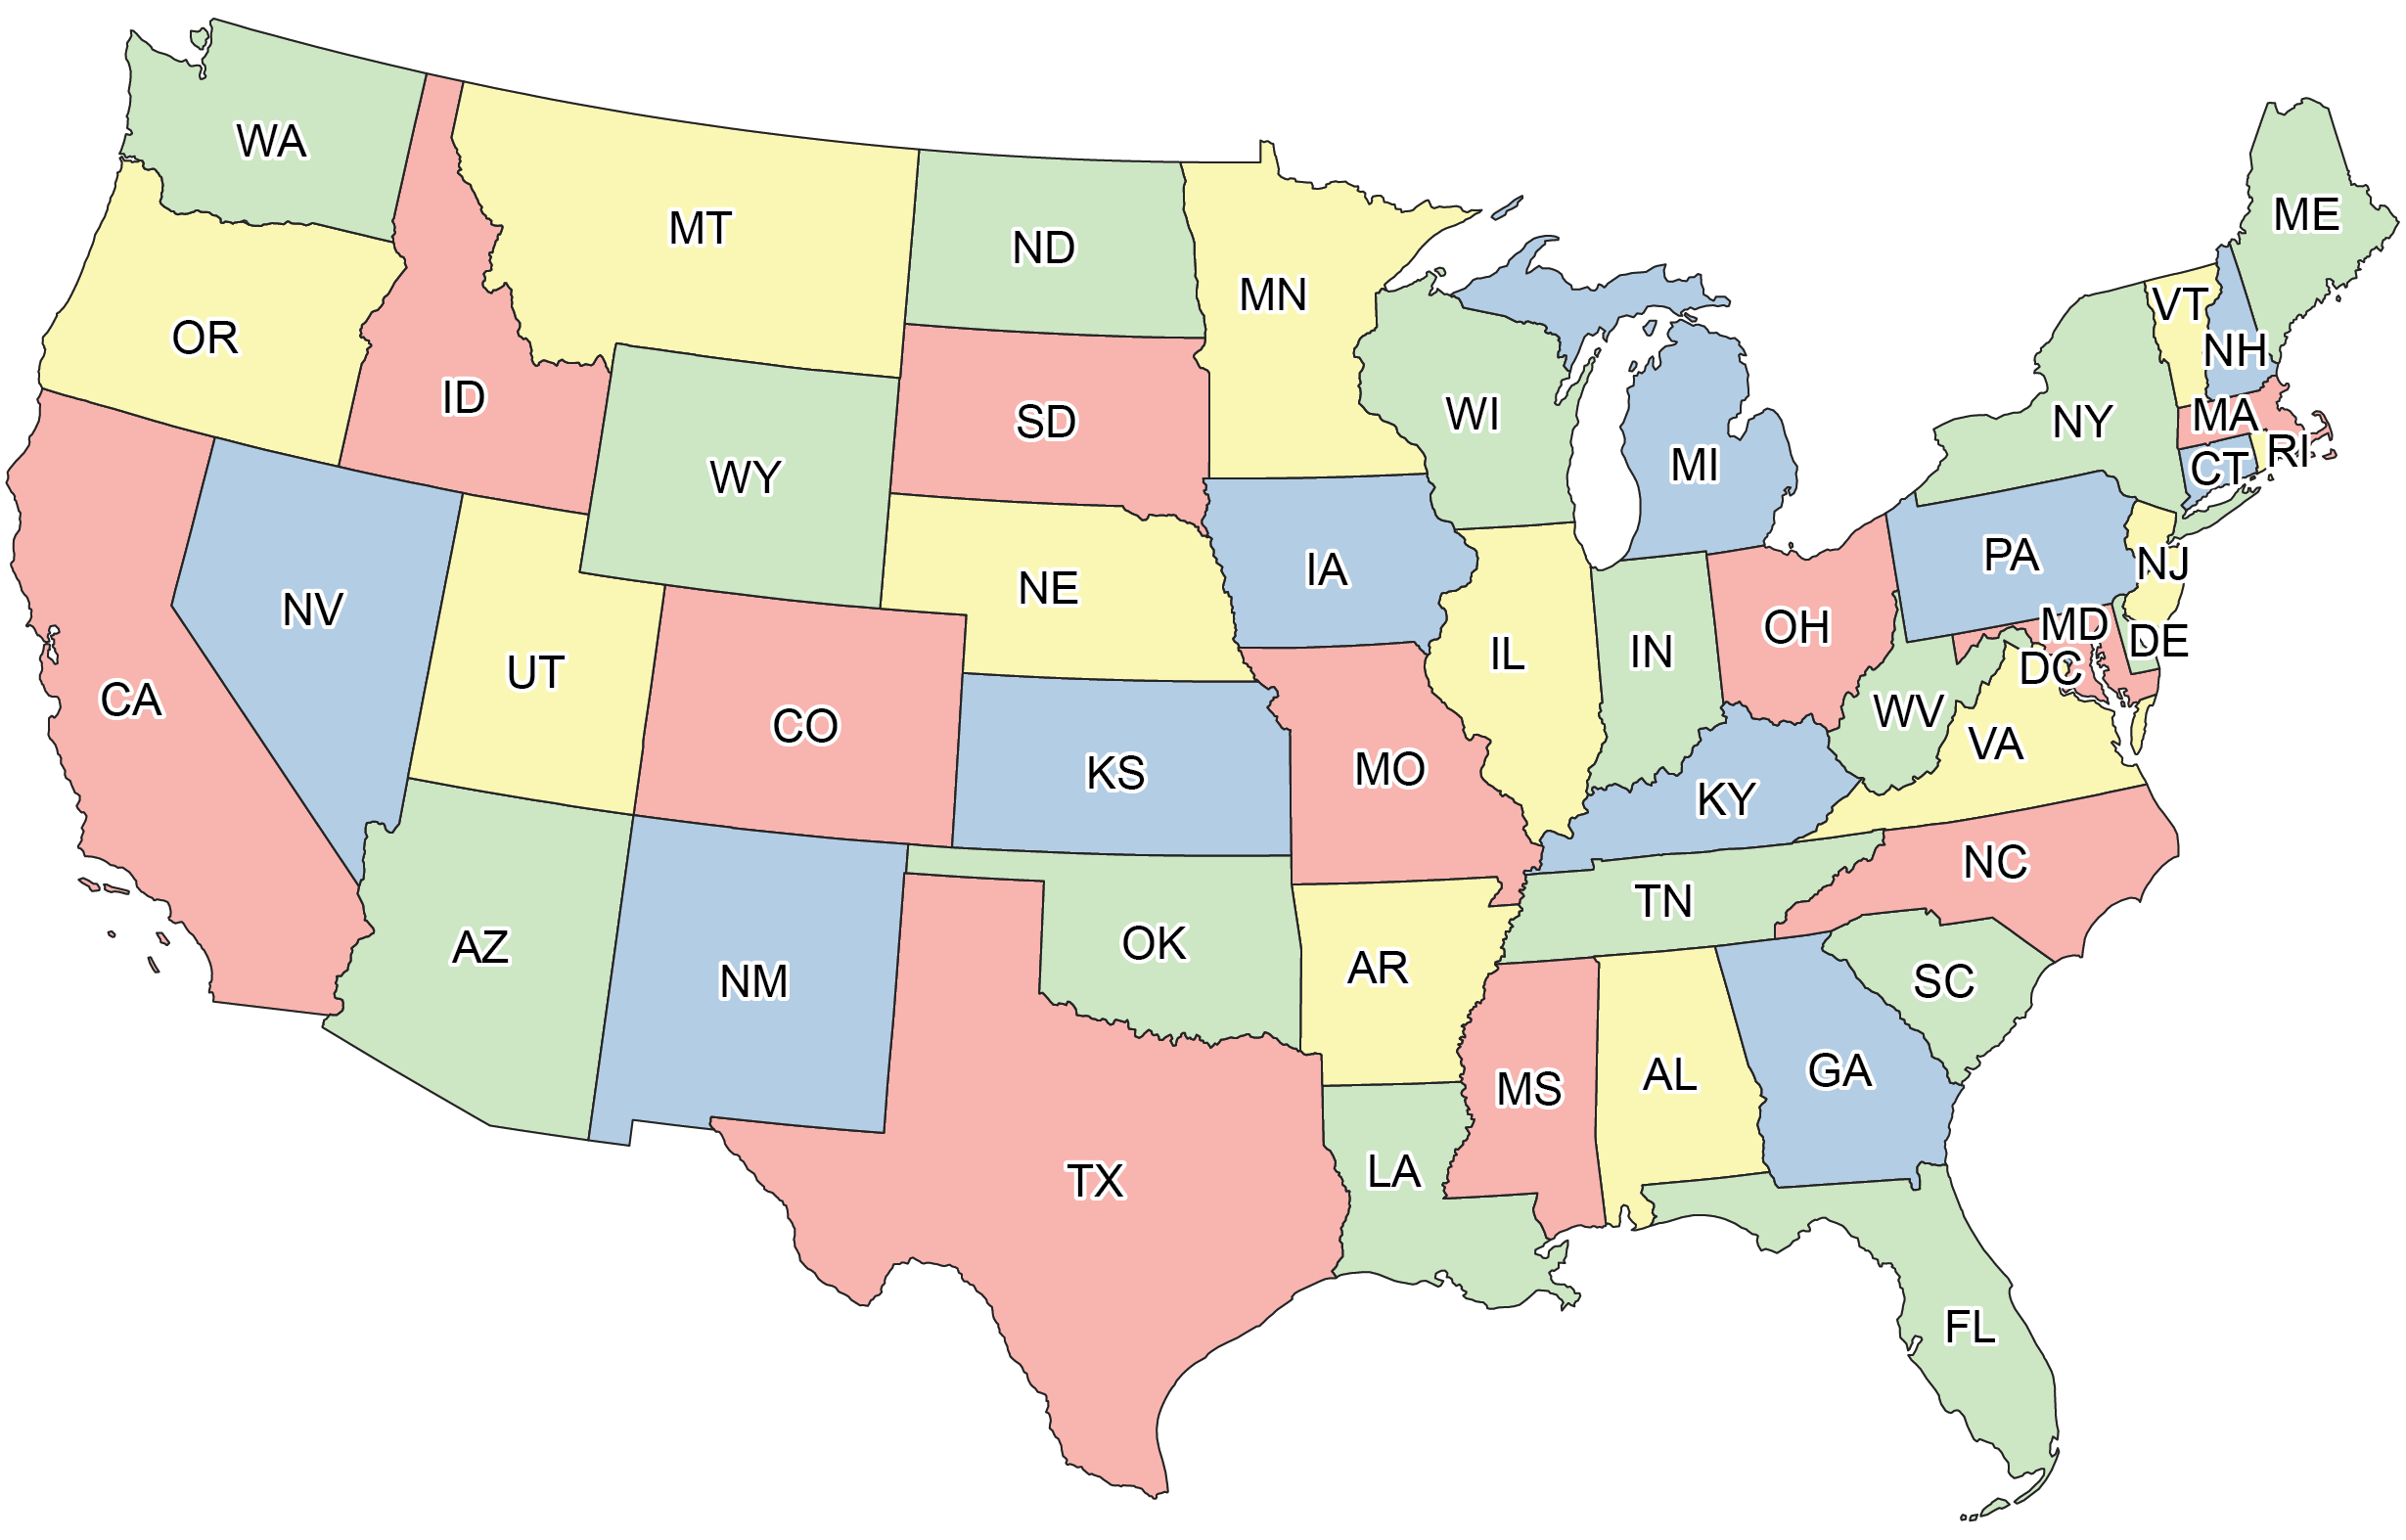 A map of the U.S. with states in yellow, green, red and blue. The states that share a border are in different colors.